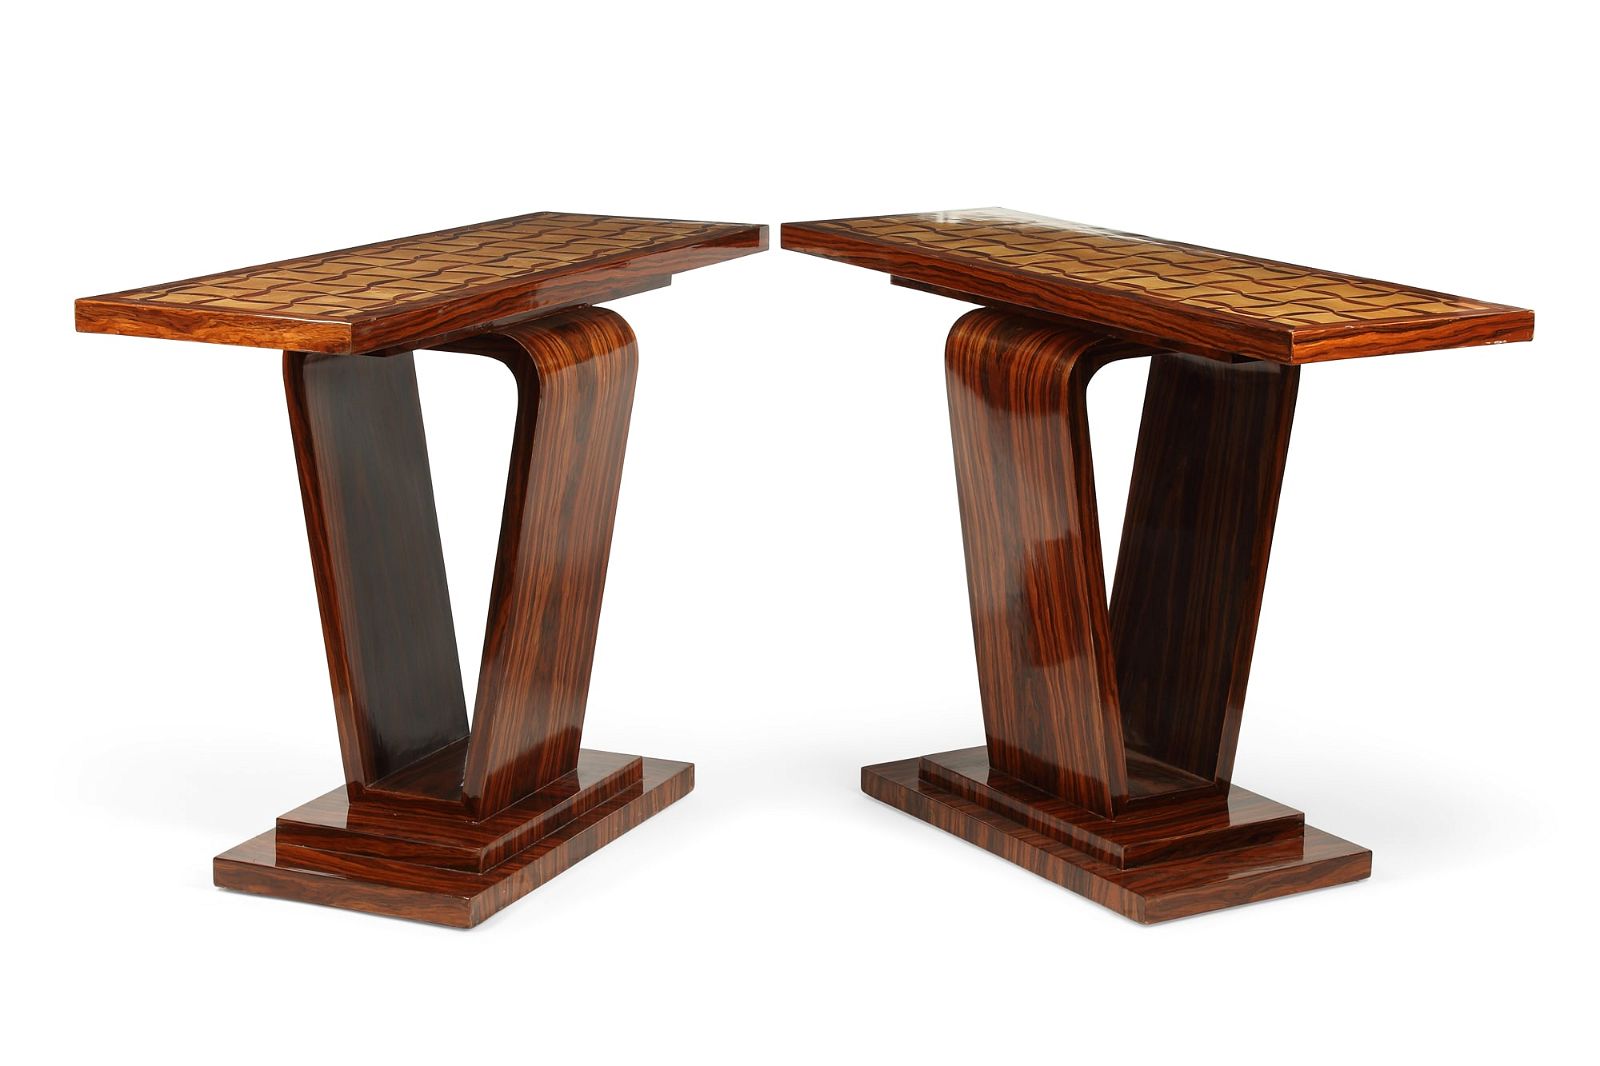 A PAIR OF ART DECO STYLE INLAID